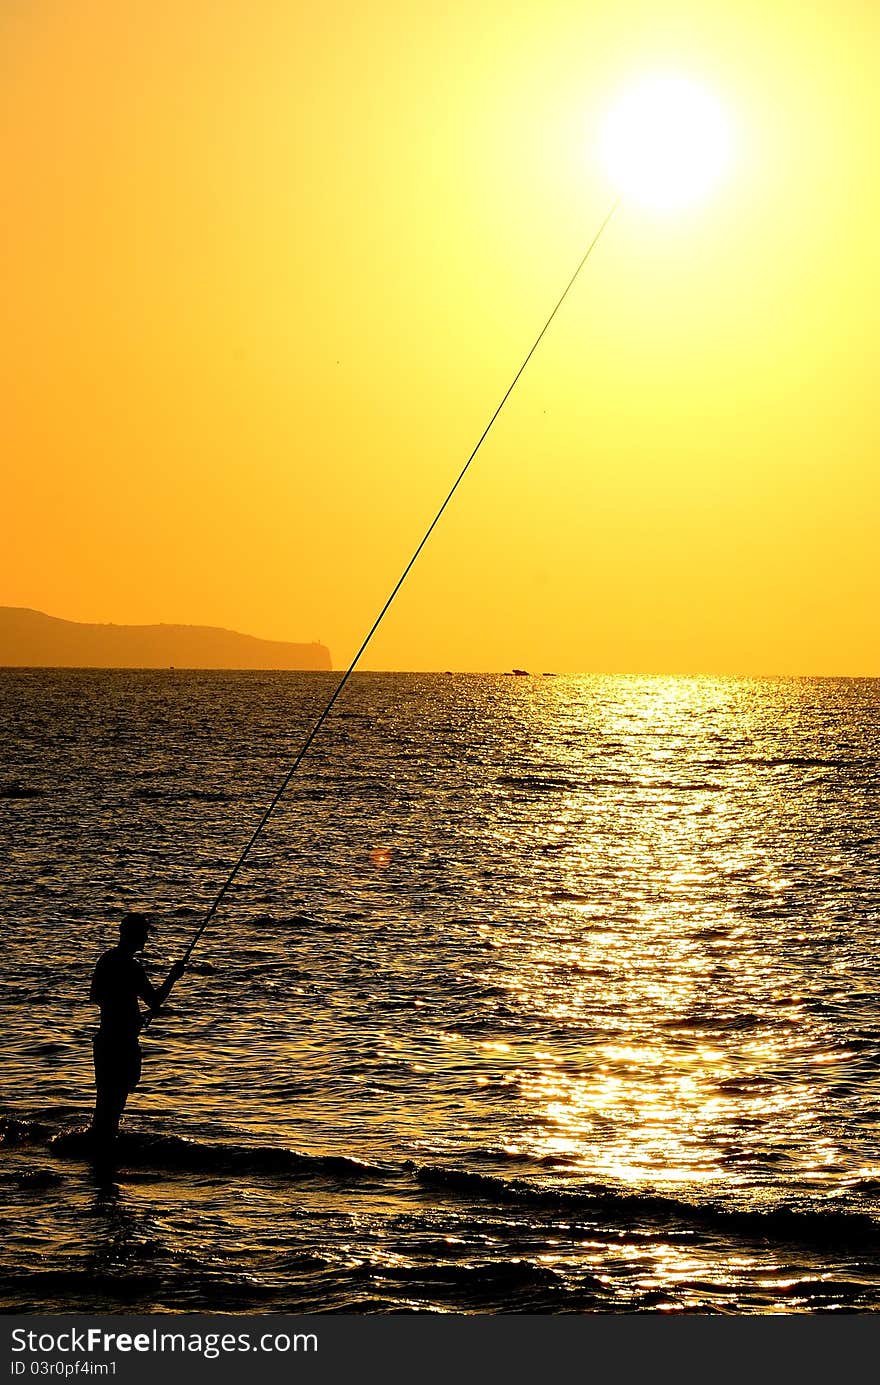 A fisherman at sunset in Sicily